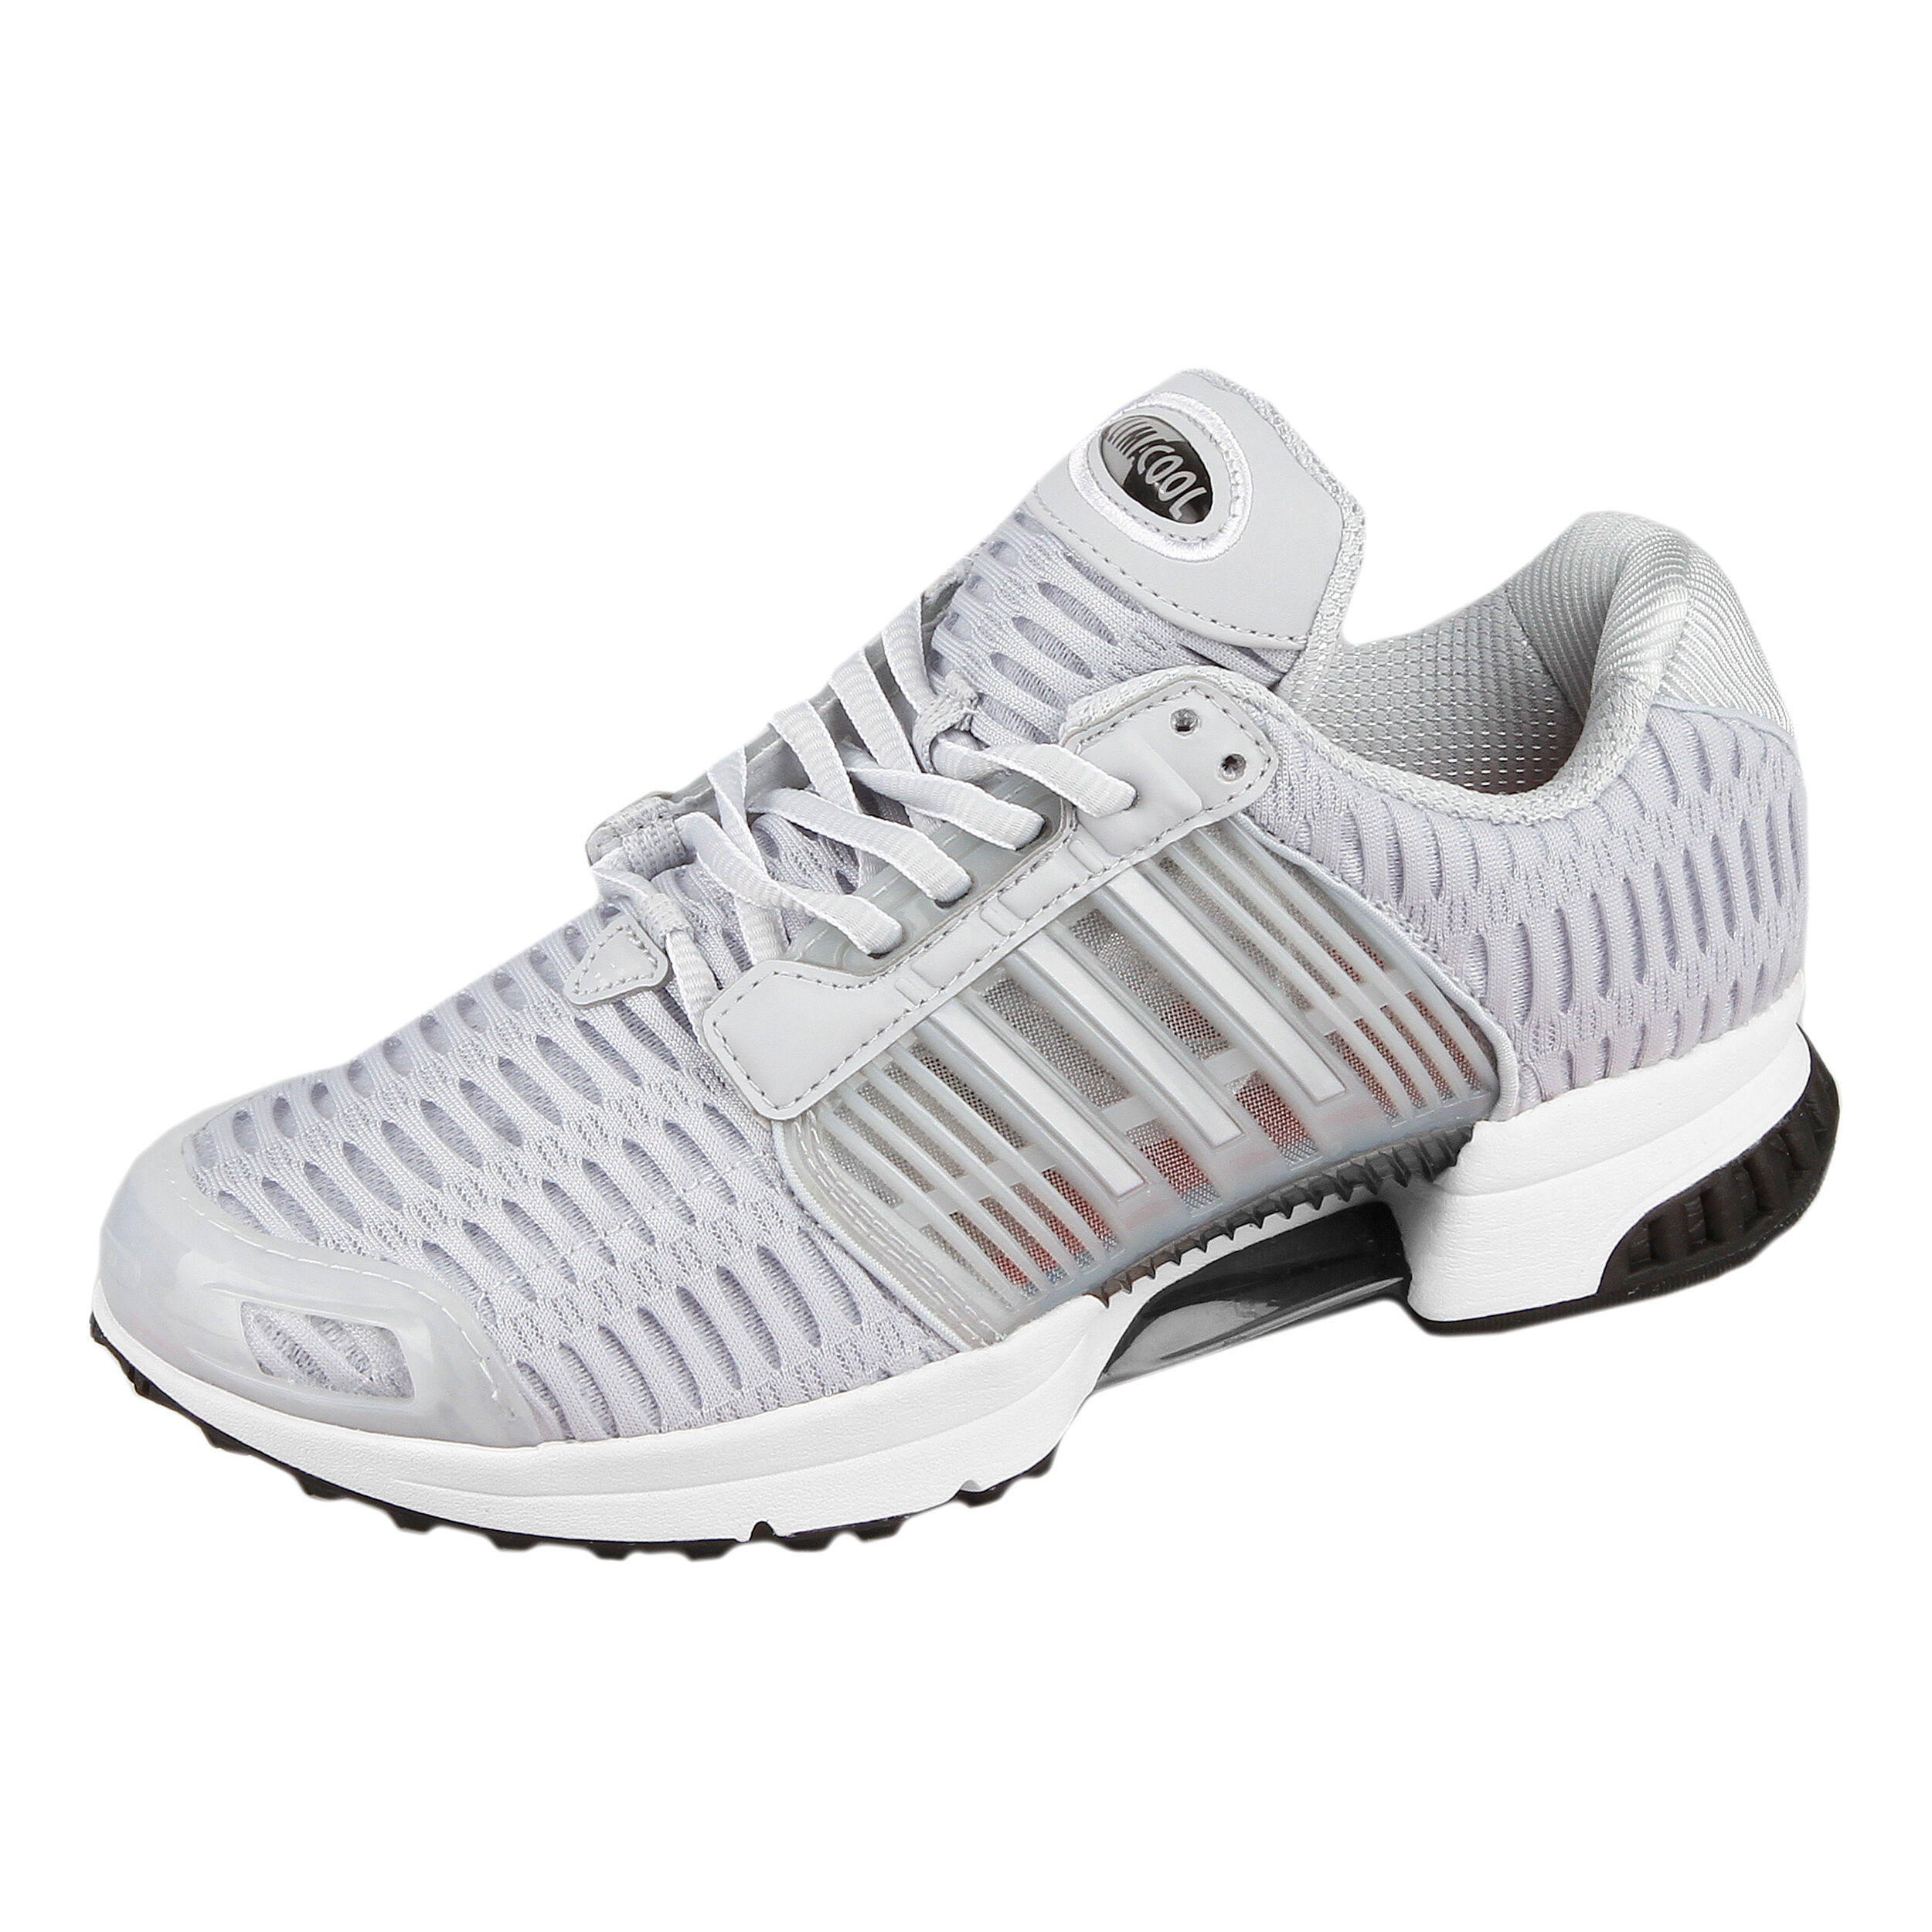 men's adidas climacool 1 running shoes